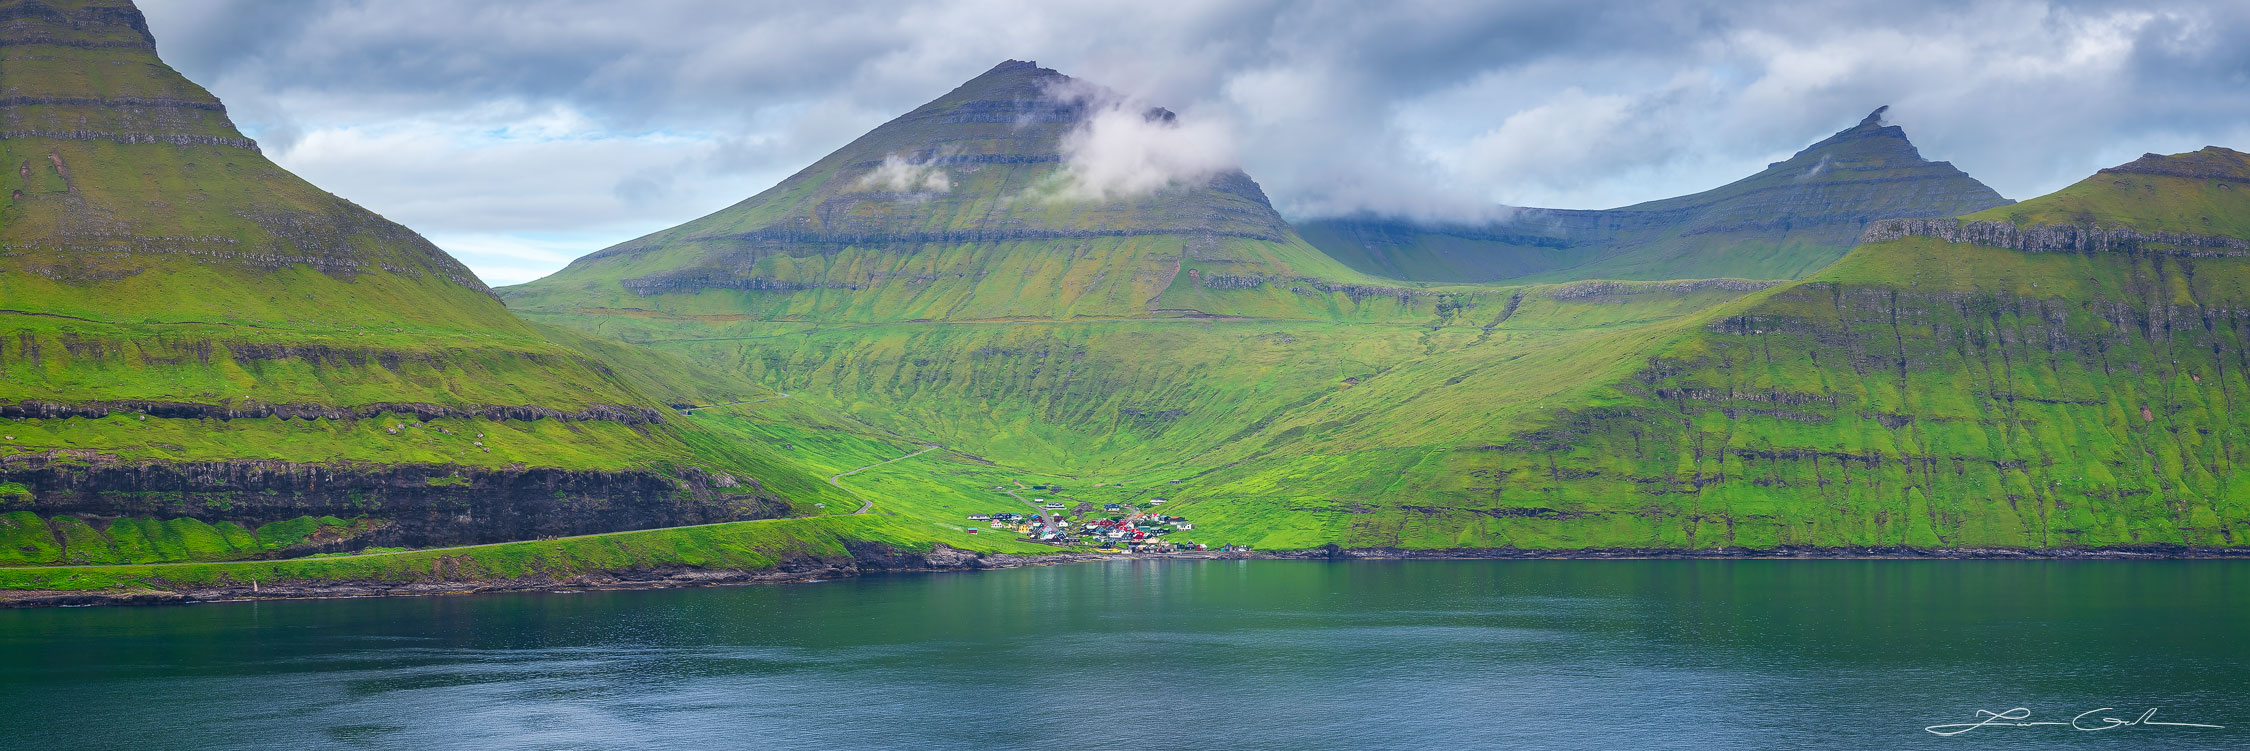 Beautiful tall lush mountains with steep shores leading into the ocean - Faroe Islands - Gintchin Fine Art